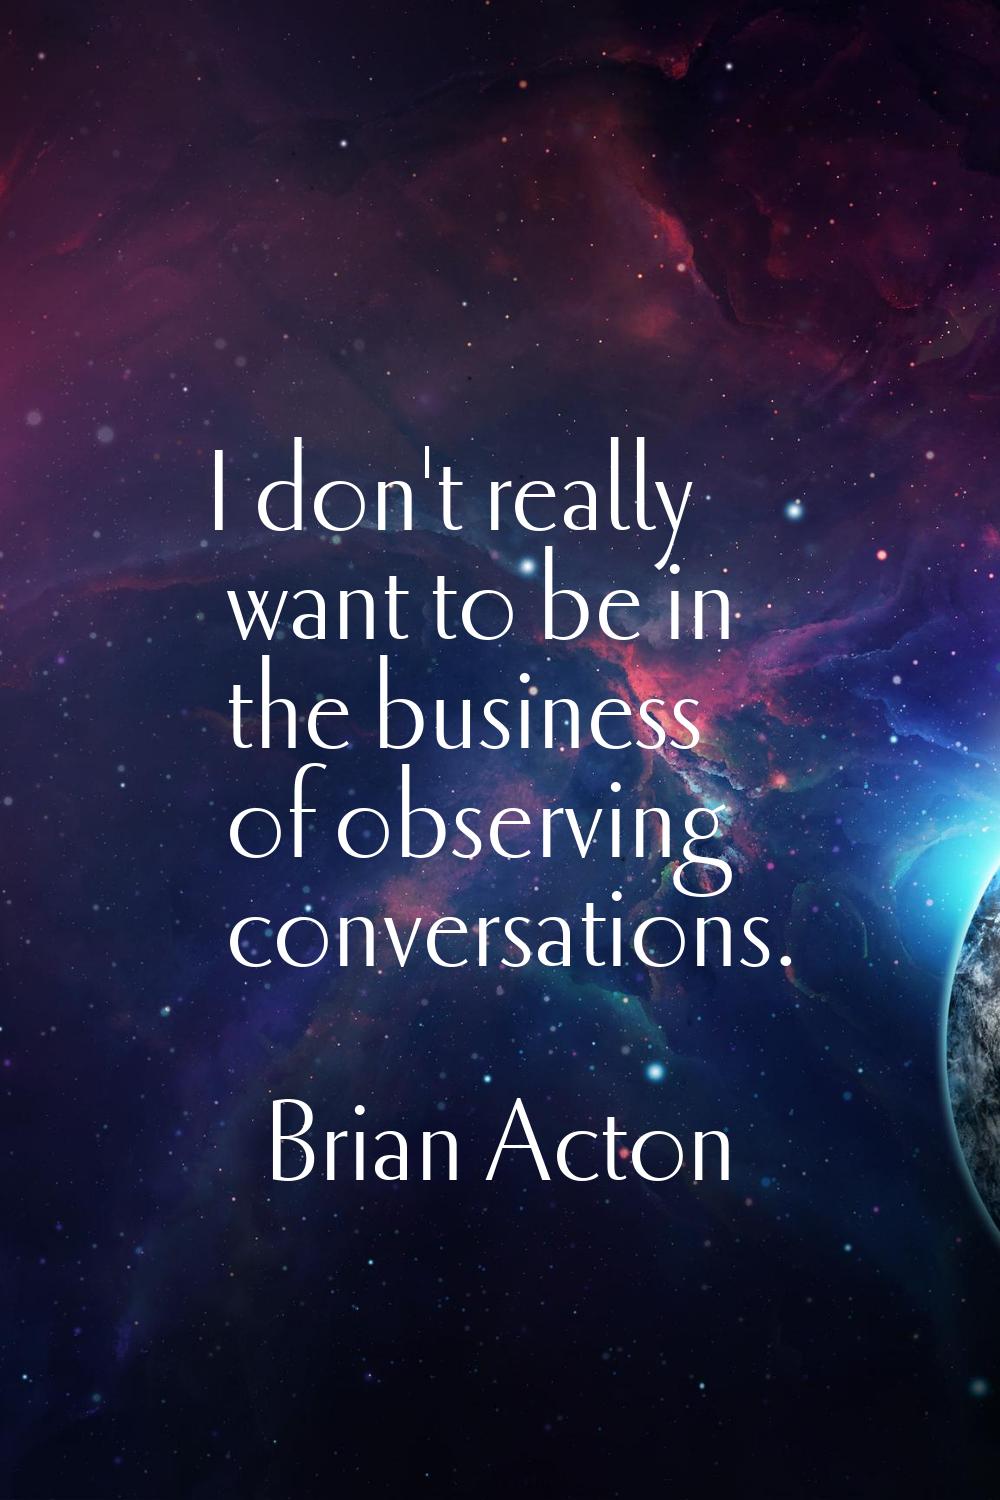 I don't really want to be in the business of observing conversations.